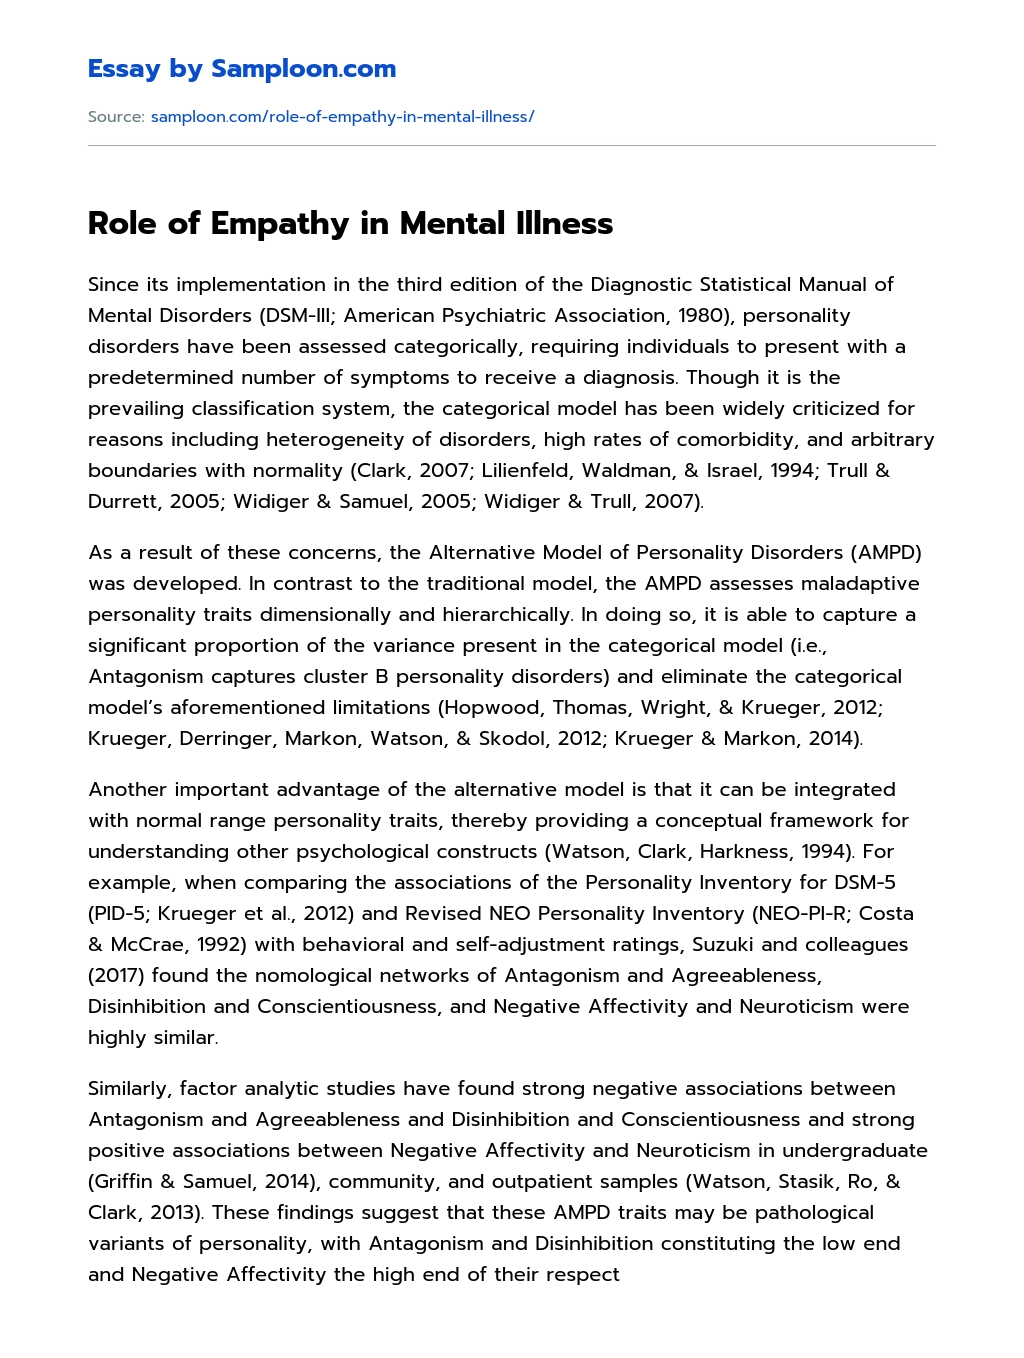 Role of Empathy in Mental Illness essay